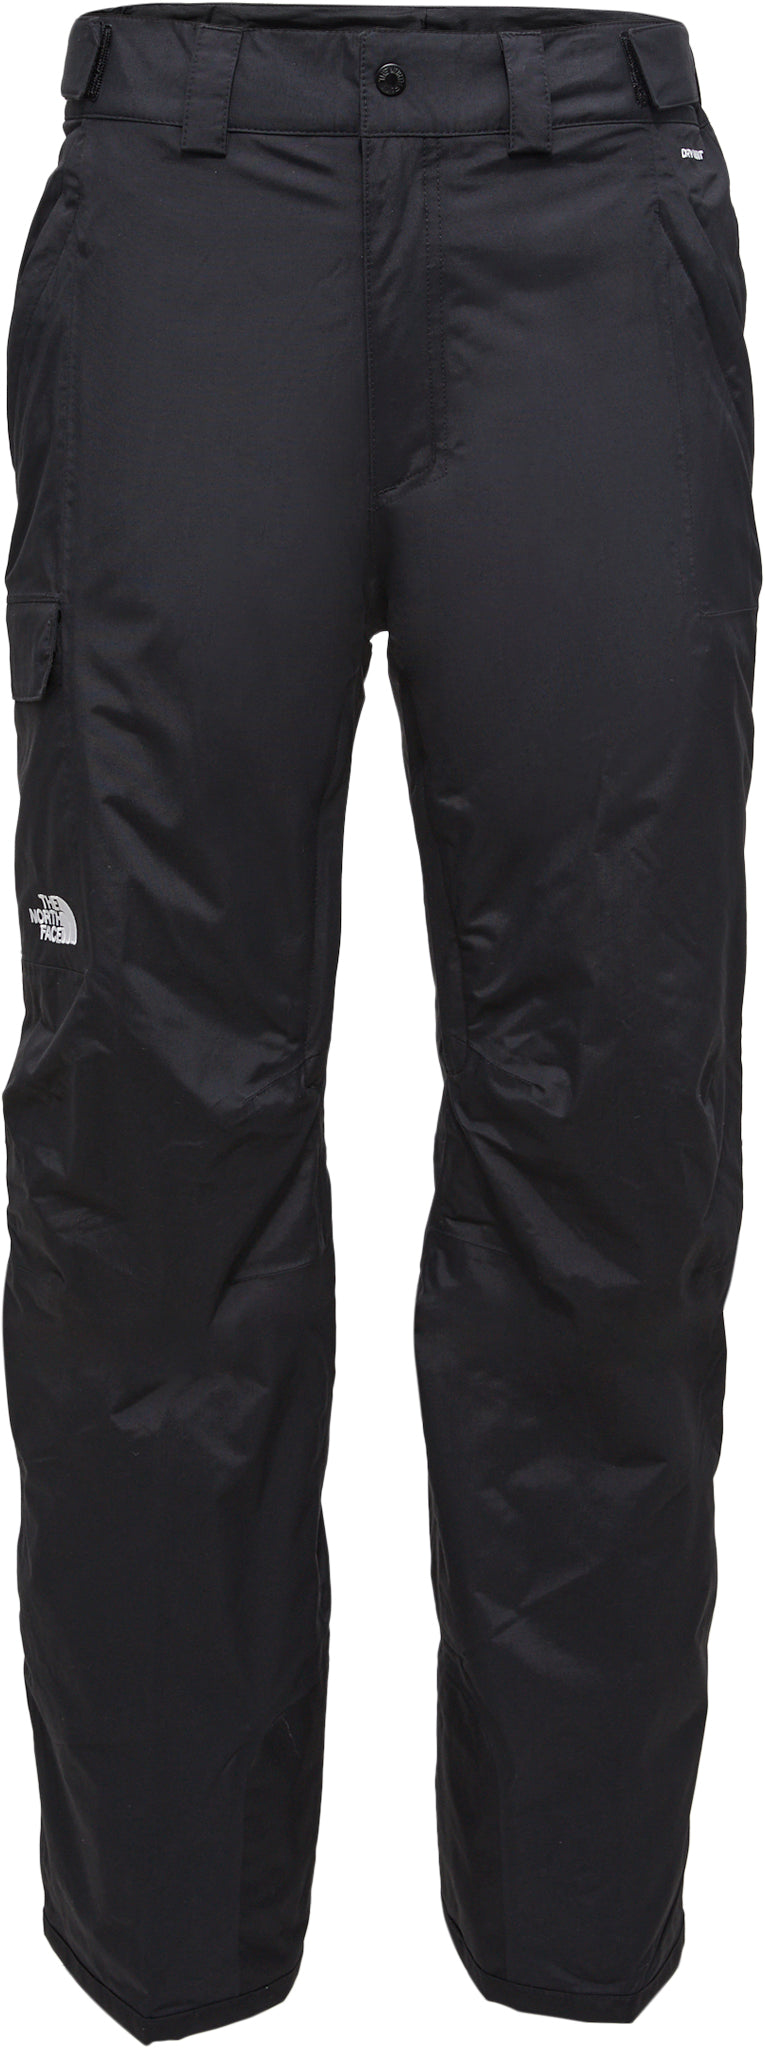 Childrens North Face Unisex Insulated Ski Pants Size  Etsy Canada